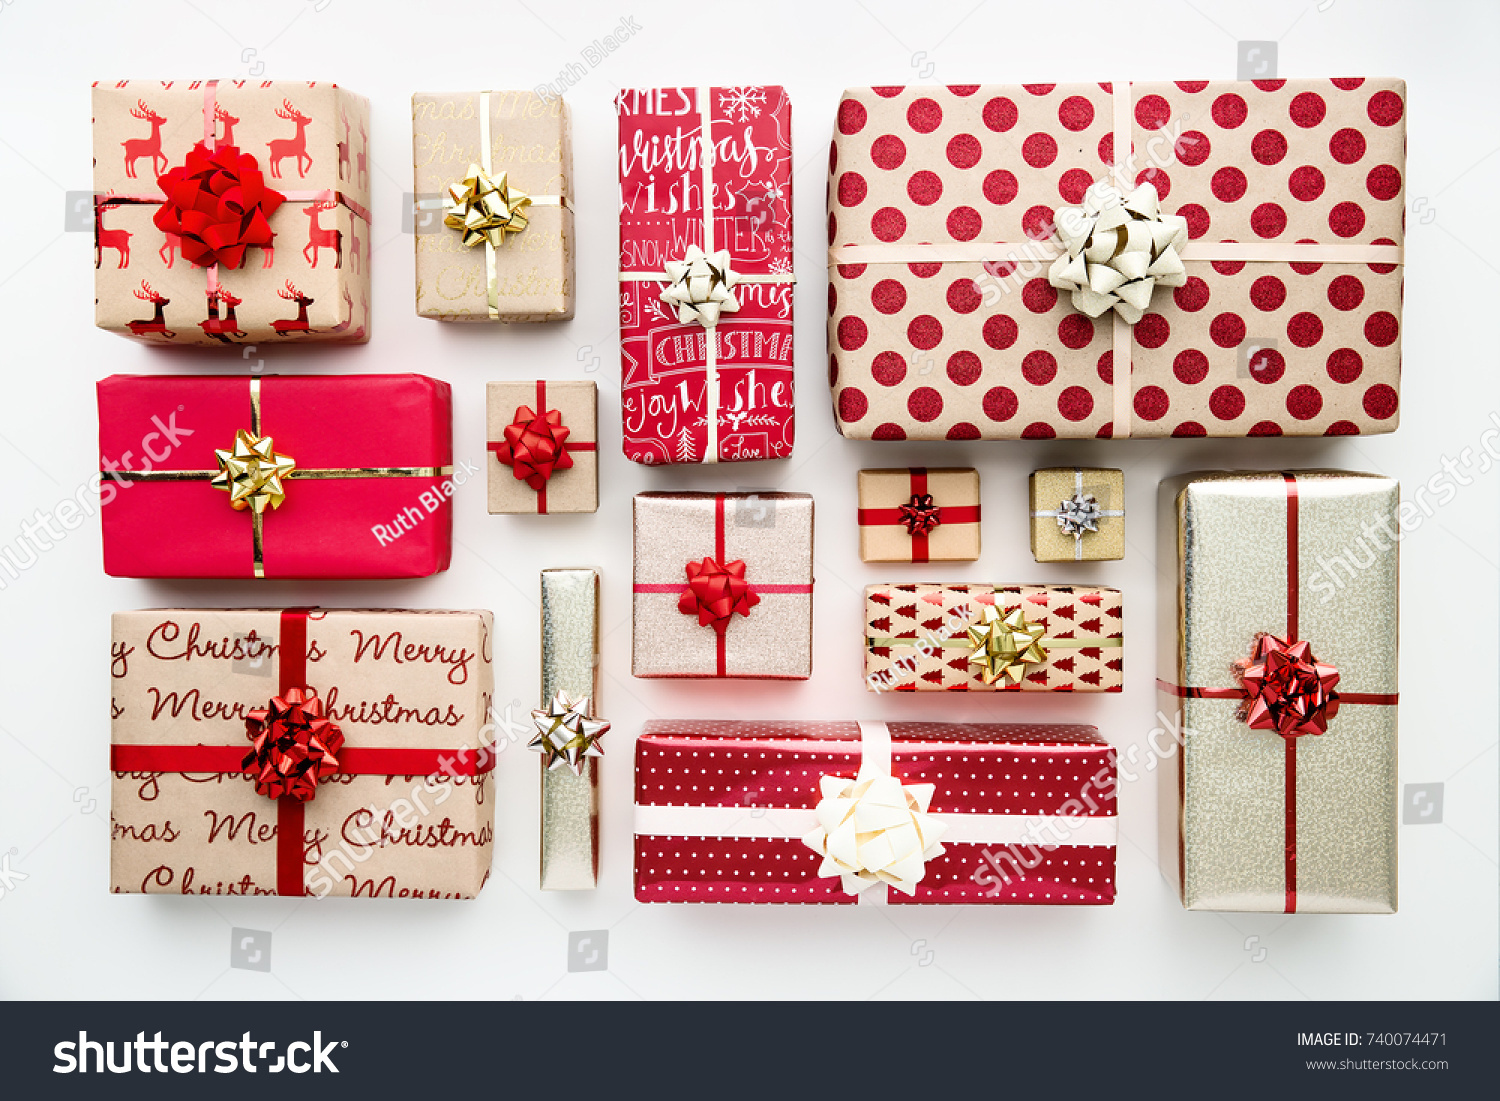 Collection of Christmas presents arranged on a white background, overhead view #740074471